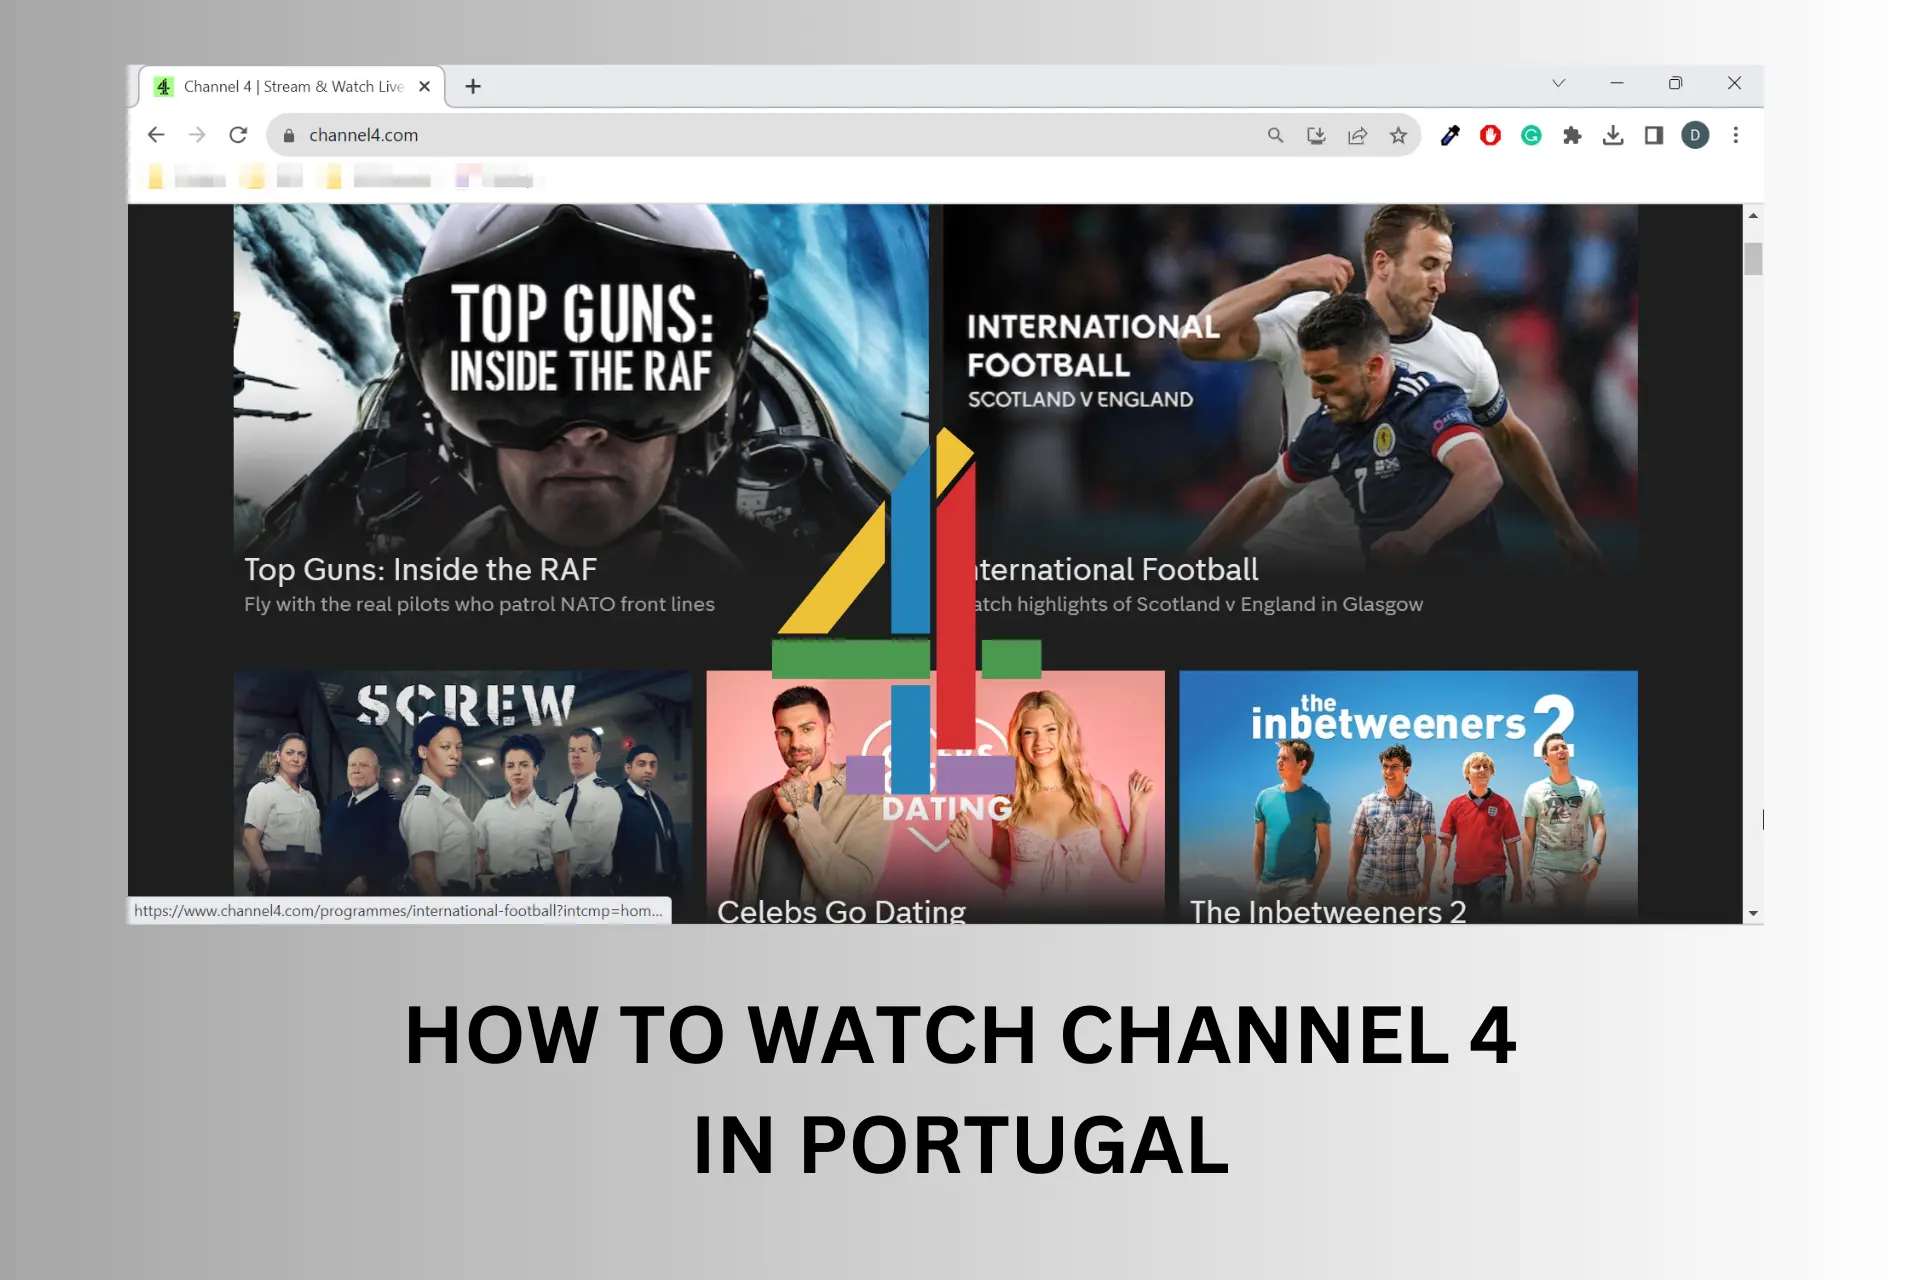 How to Watch Channel 4 in Portugal: Tested Method